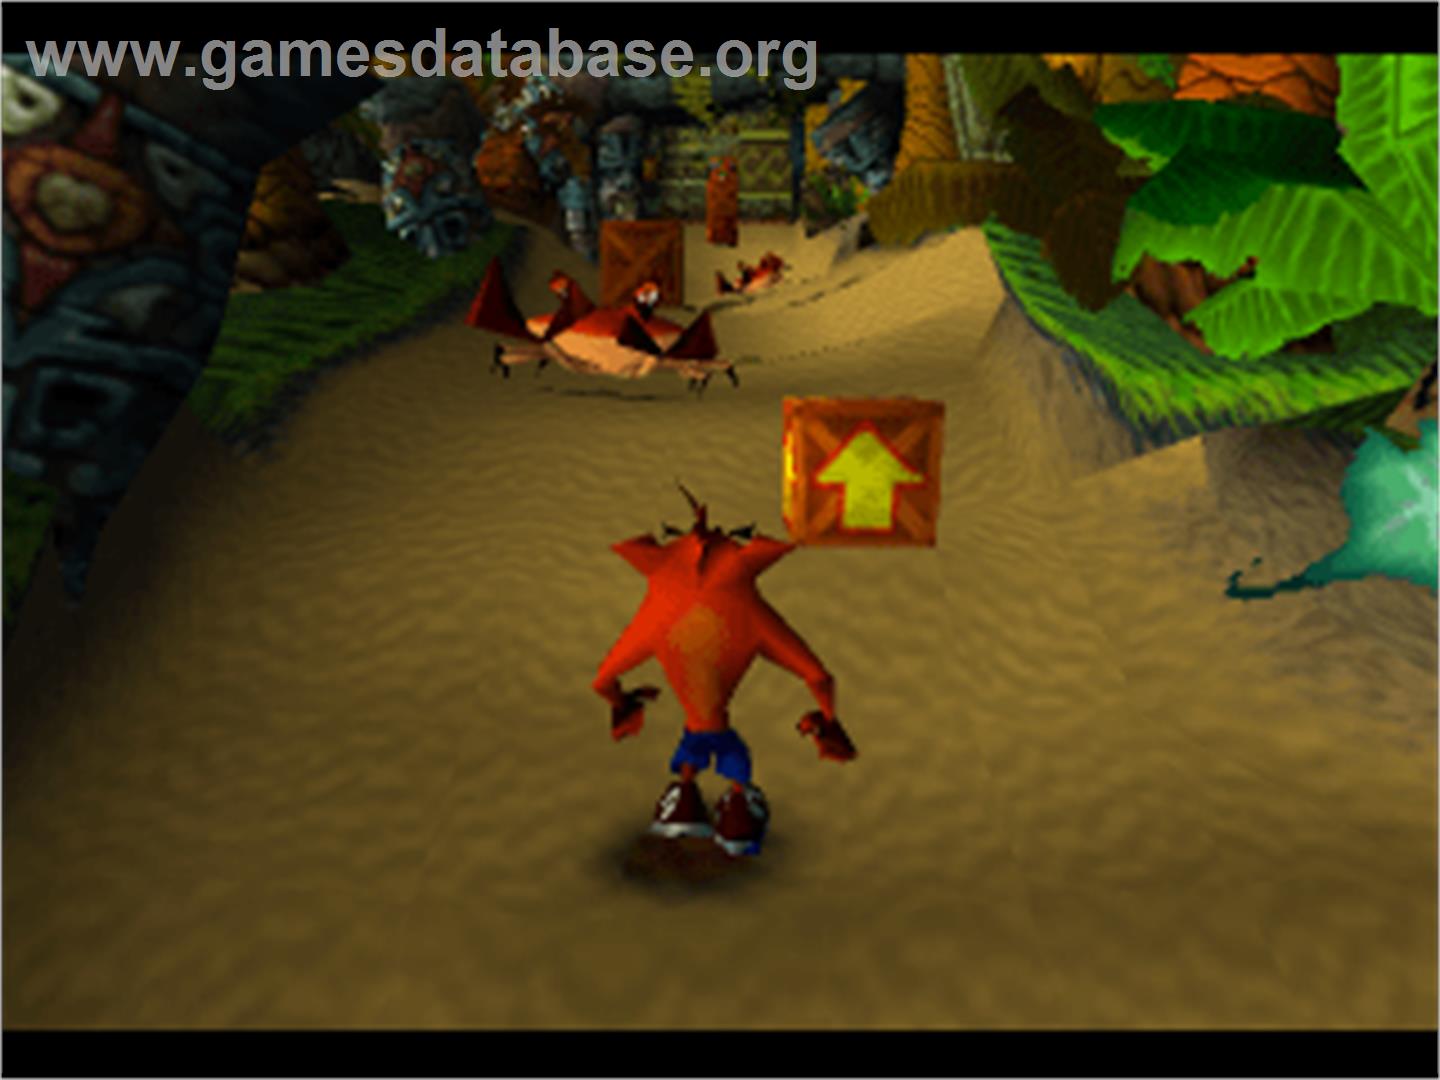 Crash Bandicoot (Collector's Edition) - Sony Playstation - Artwork - In Game